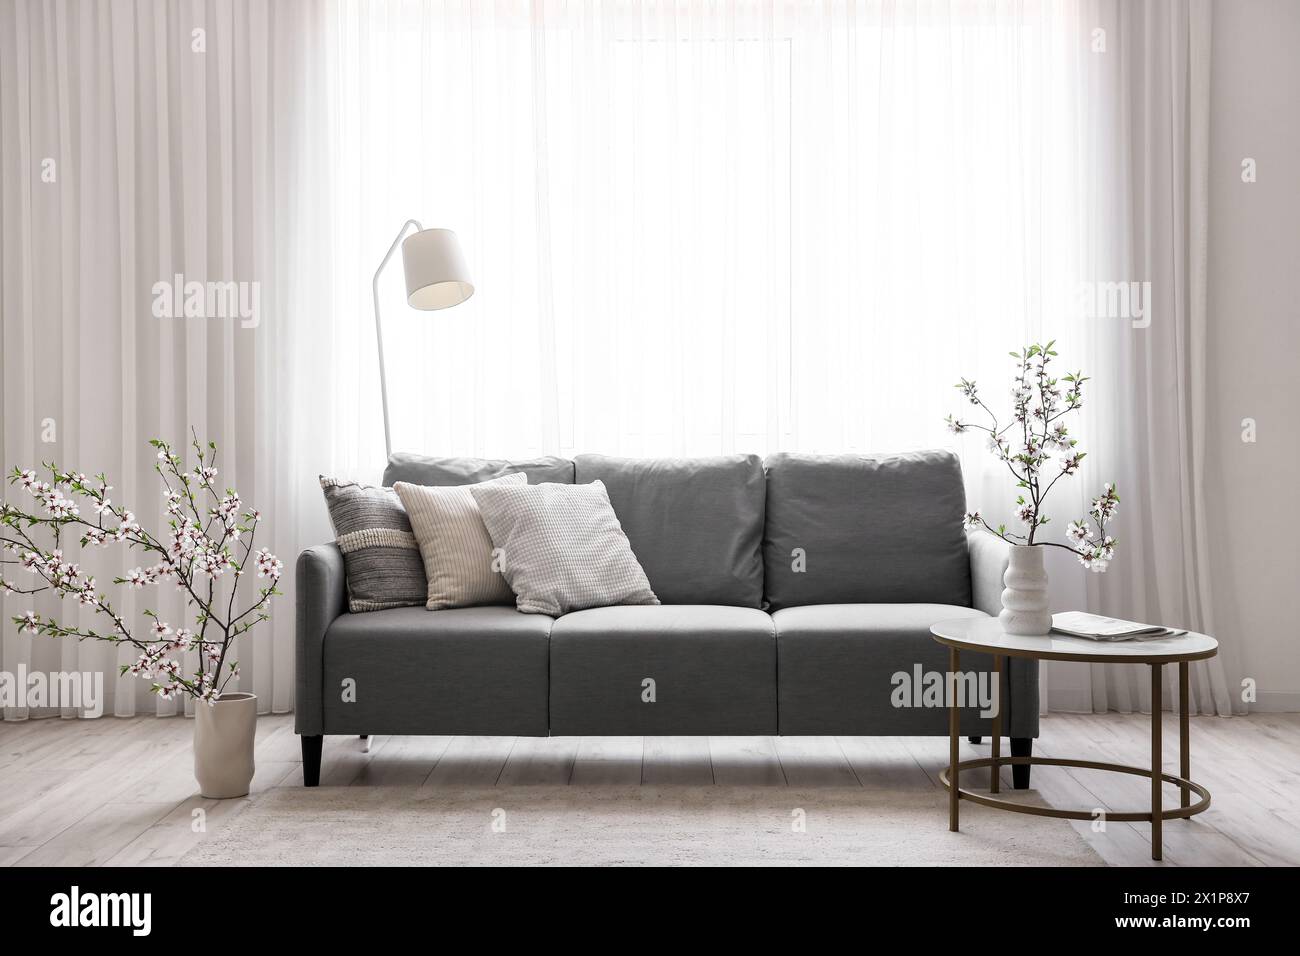 Grey sofa and vase with blooming branches on coffee table in interior of light living room Stock Photo